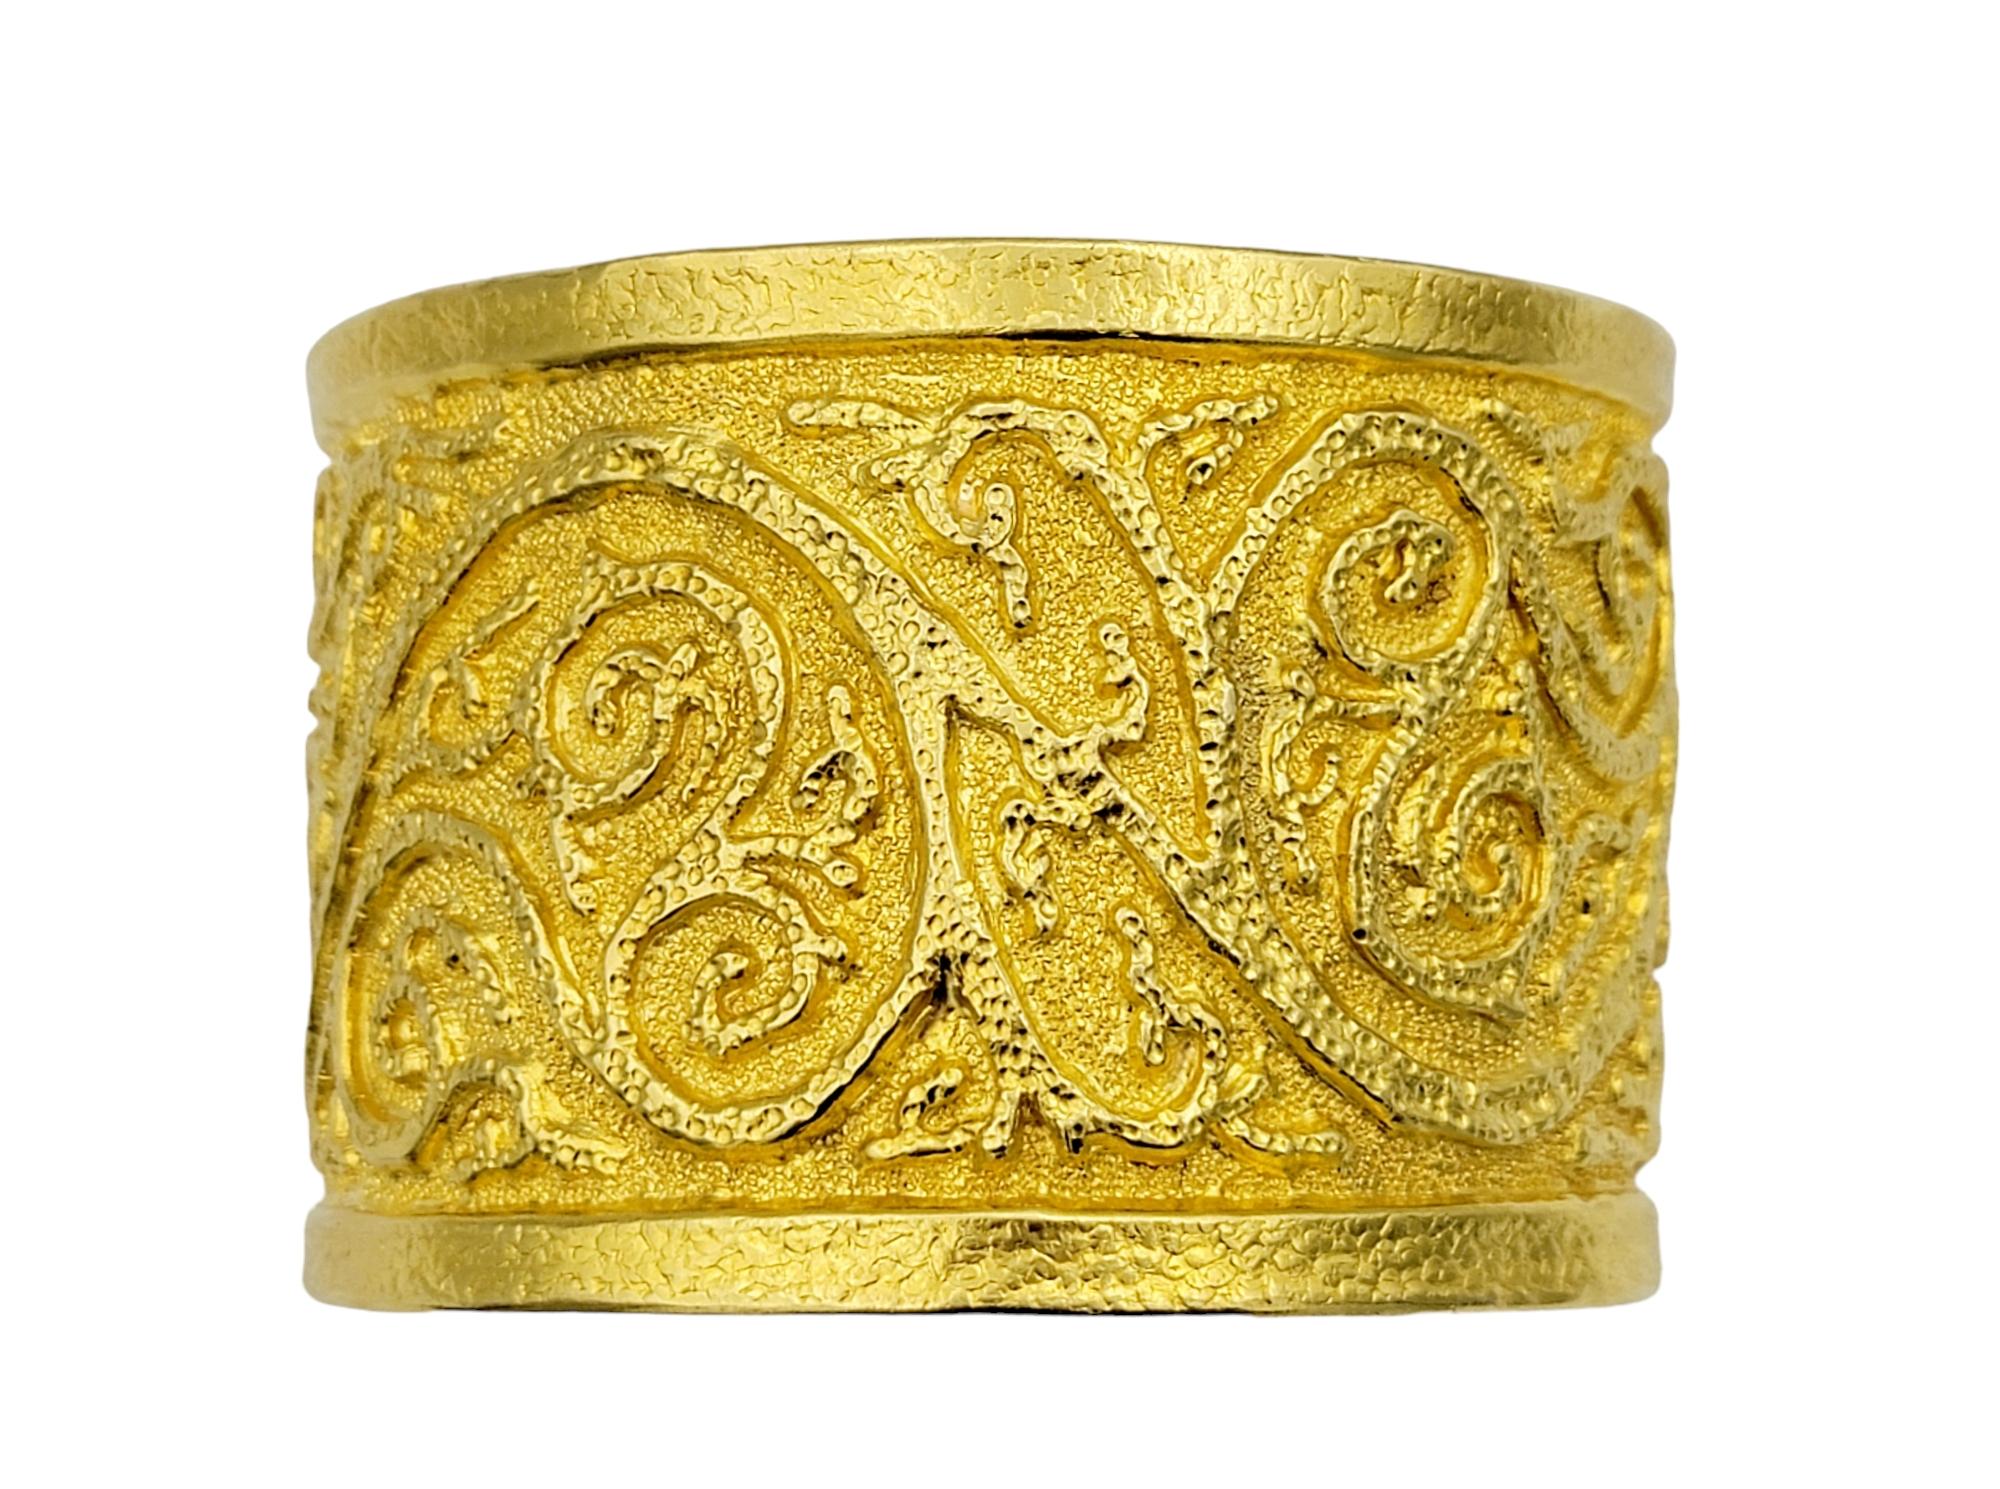 The inner circumference of this bracelet measures 7.25 inches and will comfortably fit up to a 7 inch wrist. 

Crafted from opulent 22 karat yellow gold, this wide cuff bracelet boasts an intricate scroll design that spans its entire surface. The